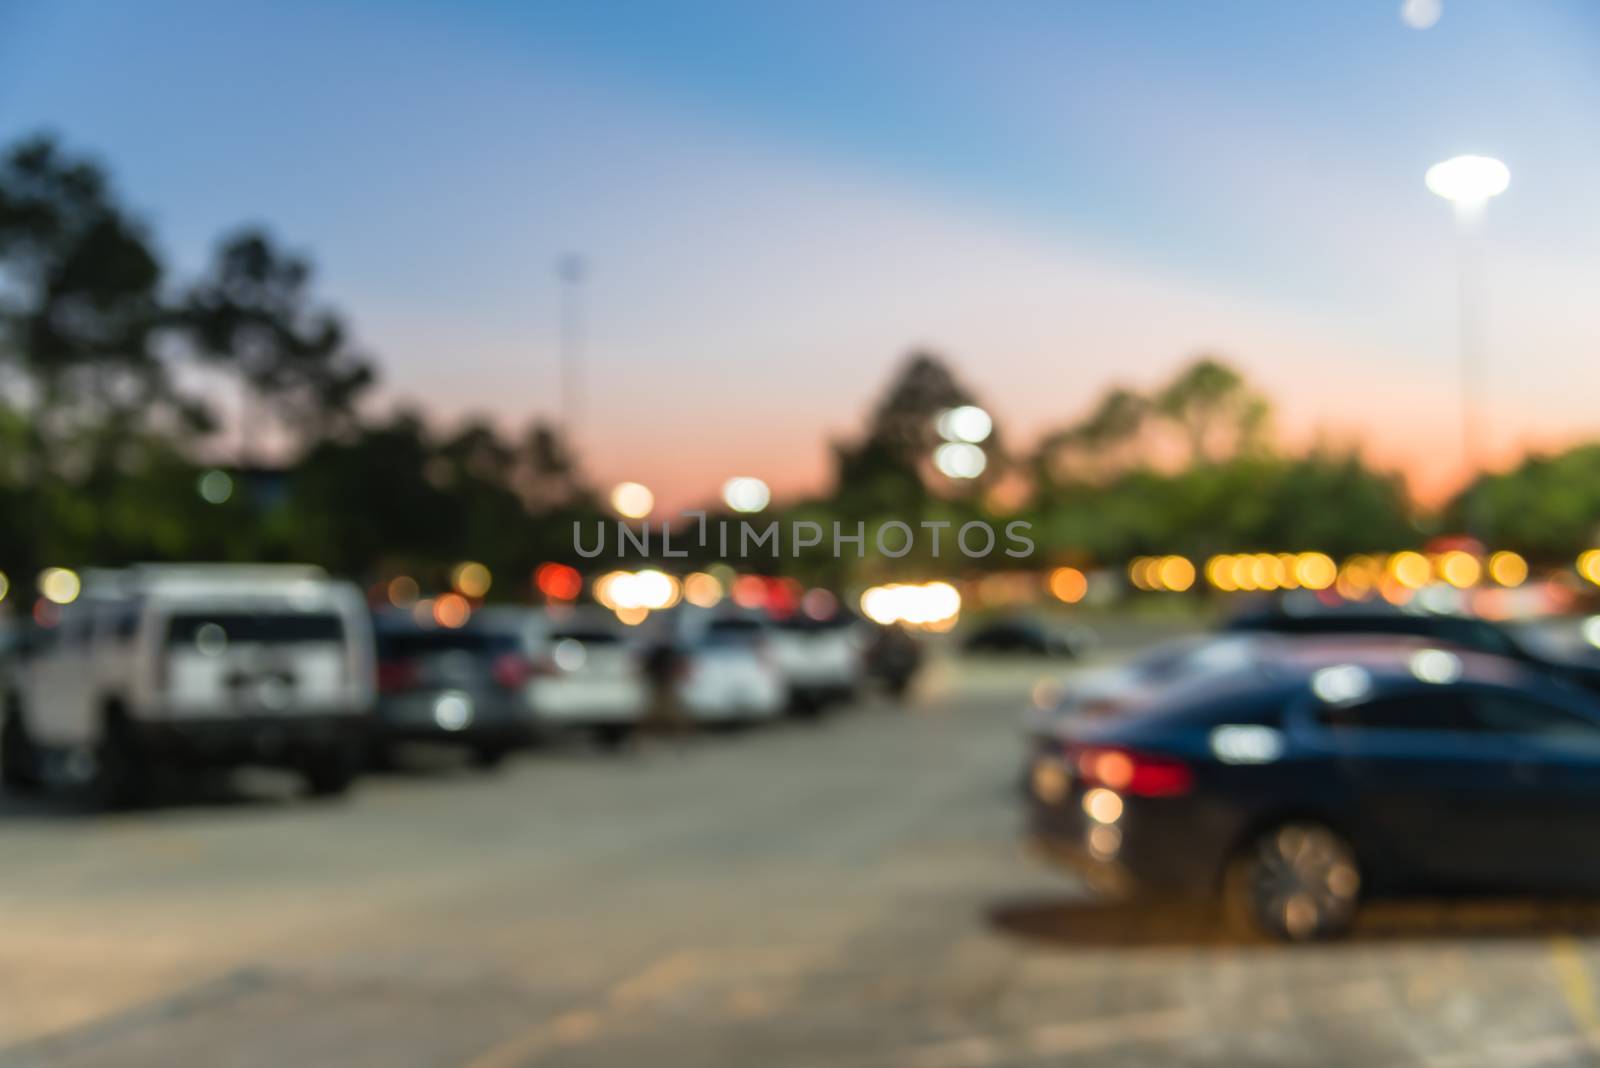 Blurred abstract retail store facade of modern shopping center in Humble, Texas, US at sunset. Mall complex with row of cars in outdoor uncovered parking lots with light poles in background